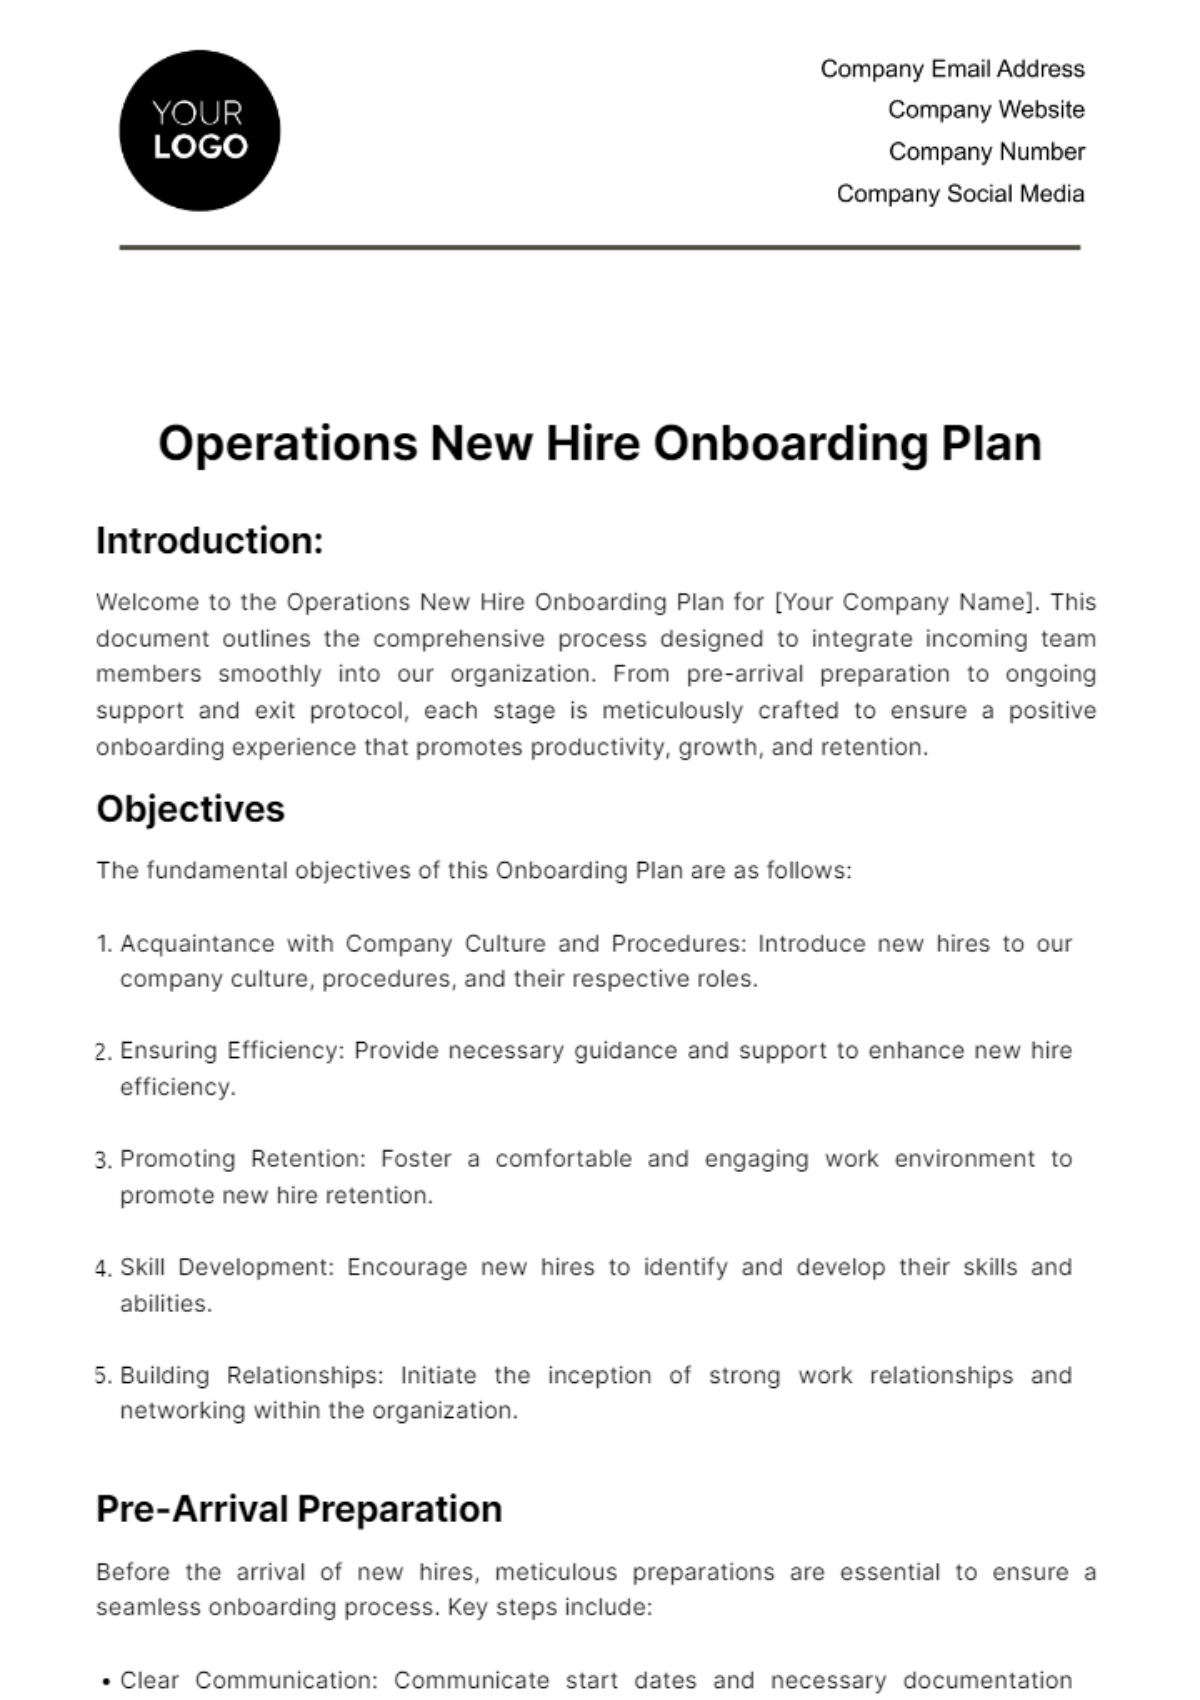 Free Operations New Hire Onboarding Plan Template